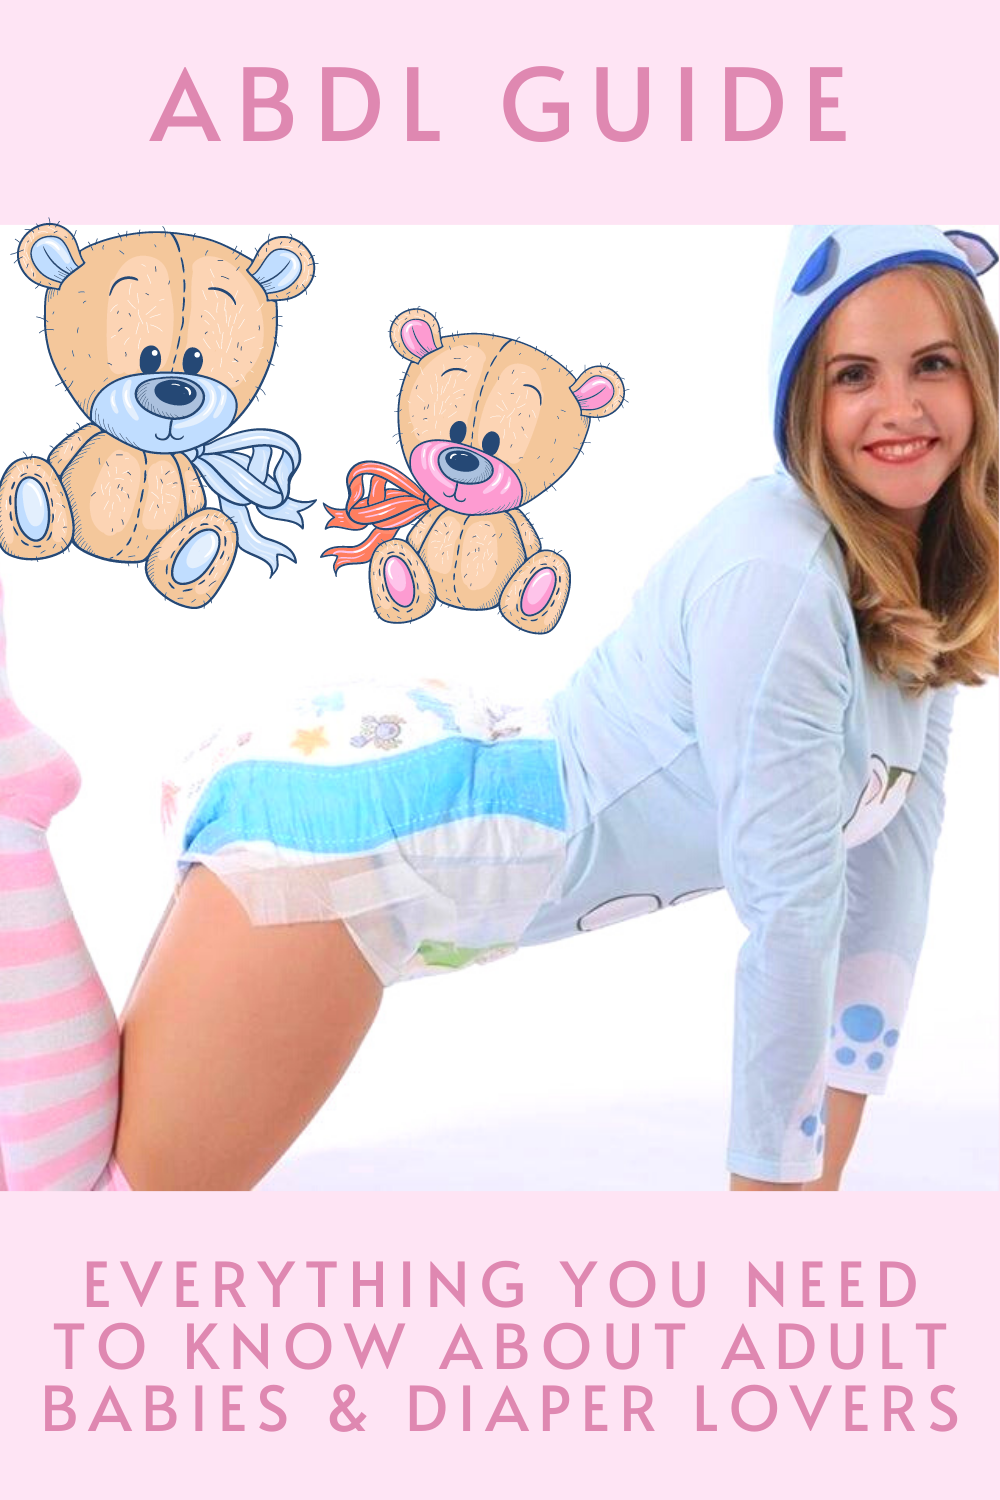 What is ABDL? ABDL is an acronym that stands for ‘adult baby’ and ‘diaper lover’ and describes a community of people in the wider kink community. An adult baby is an adult who chooses to return mentally to a childlike state, either for fun or eroticism. In scientific terms, this is called ‘paraphilic infantilism.’ It describes a kind of ‘age-play,’ which is a specific form of fantasy role play where a partner embodies a person of a different age than their actual chronological age. 